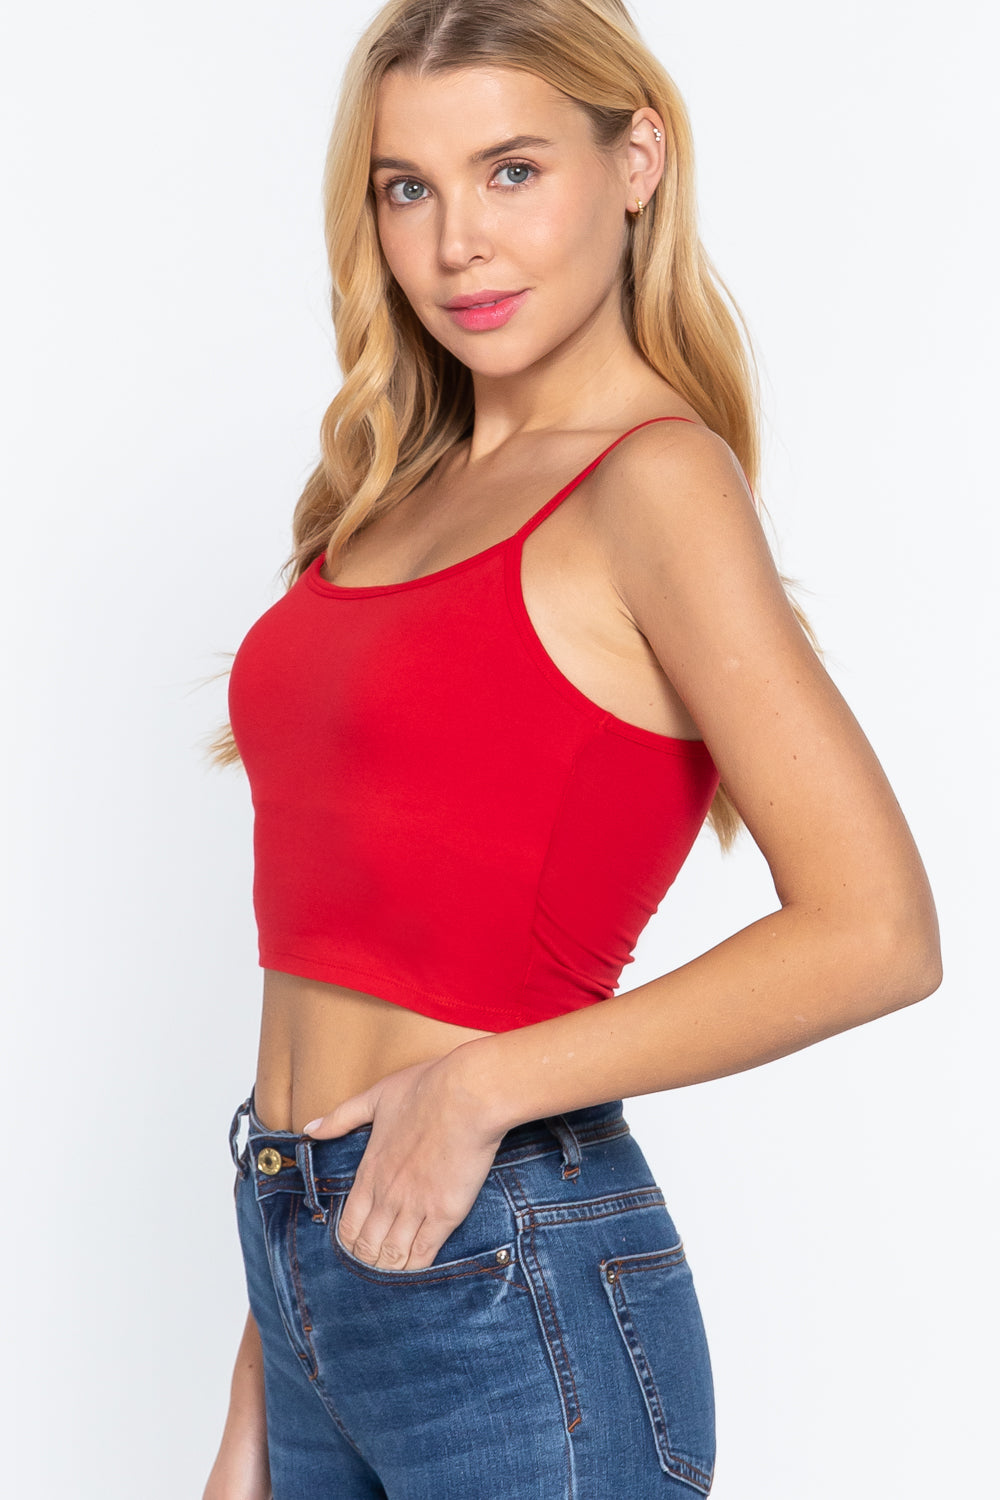 The802Gypsy  shirts and tops S / red ❤GYPSY LOVE-W/removable Bra Cup Cotton Spandex Bra Top